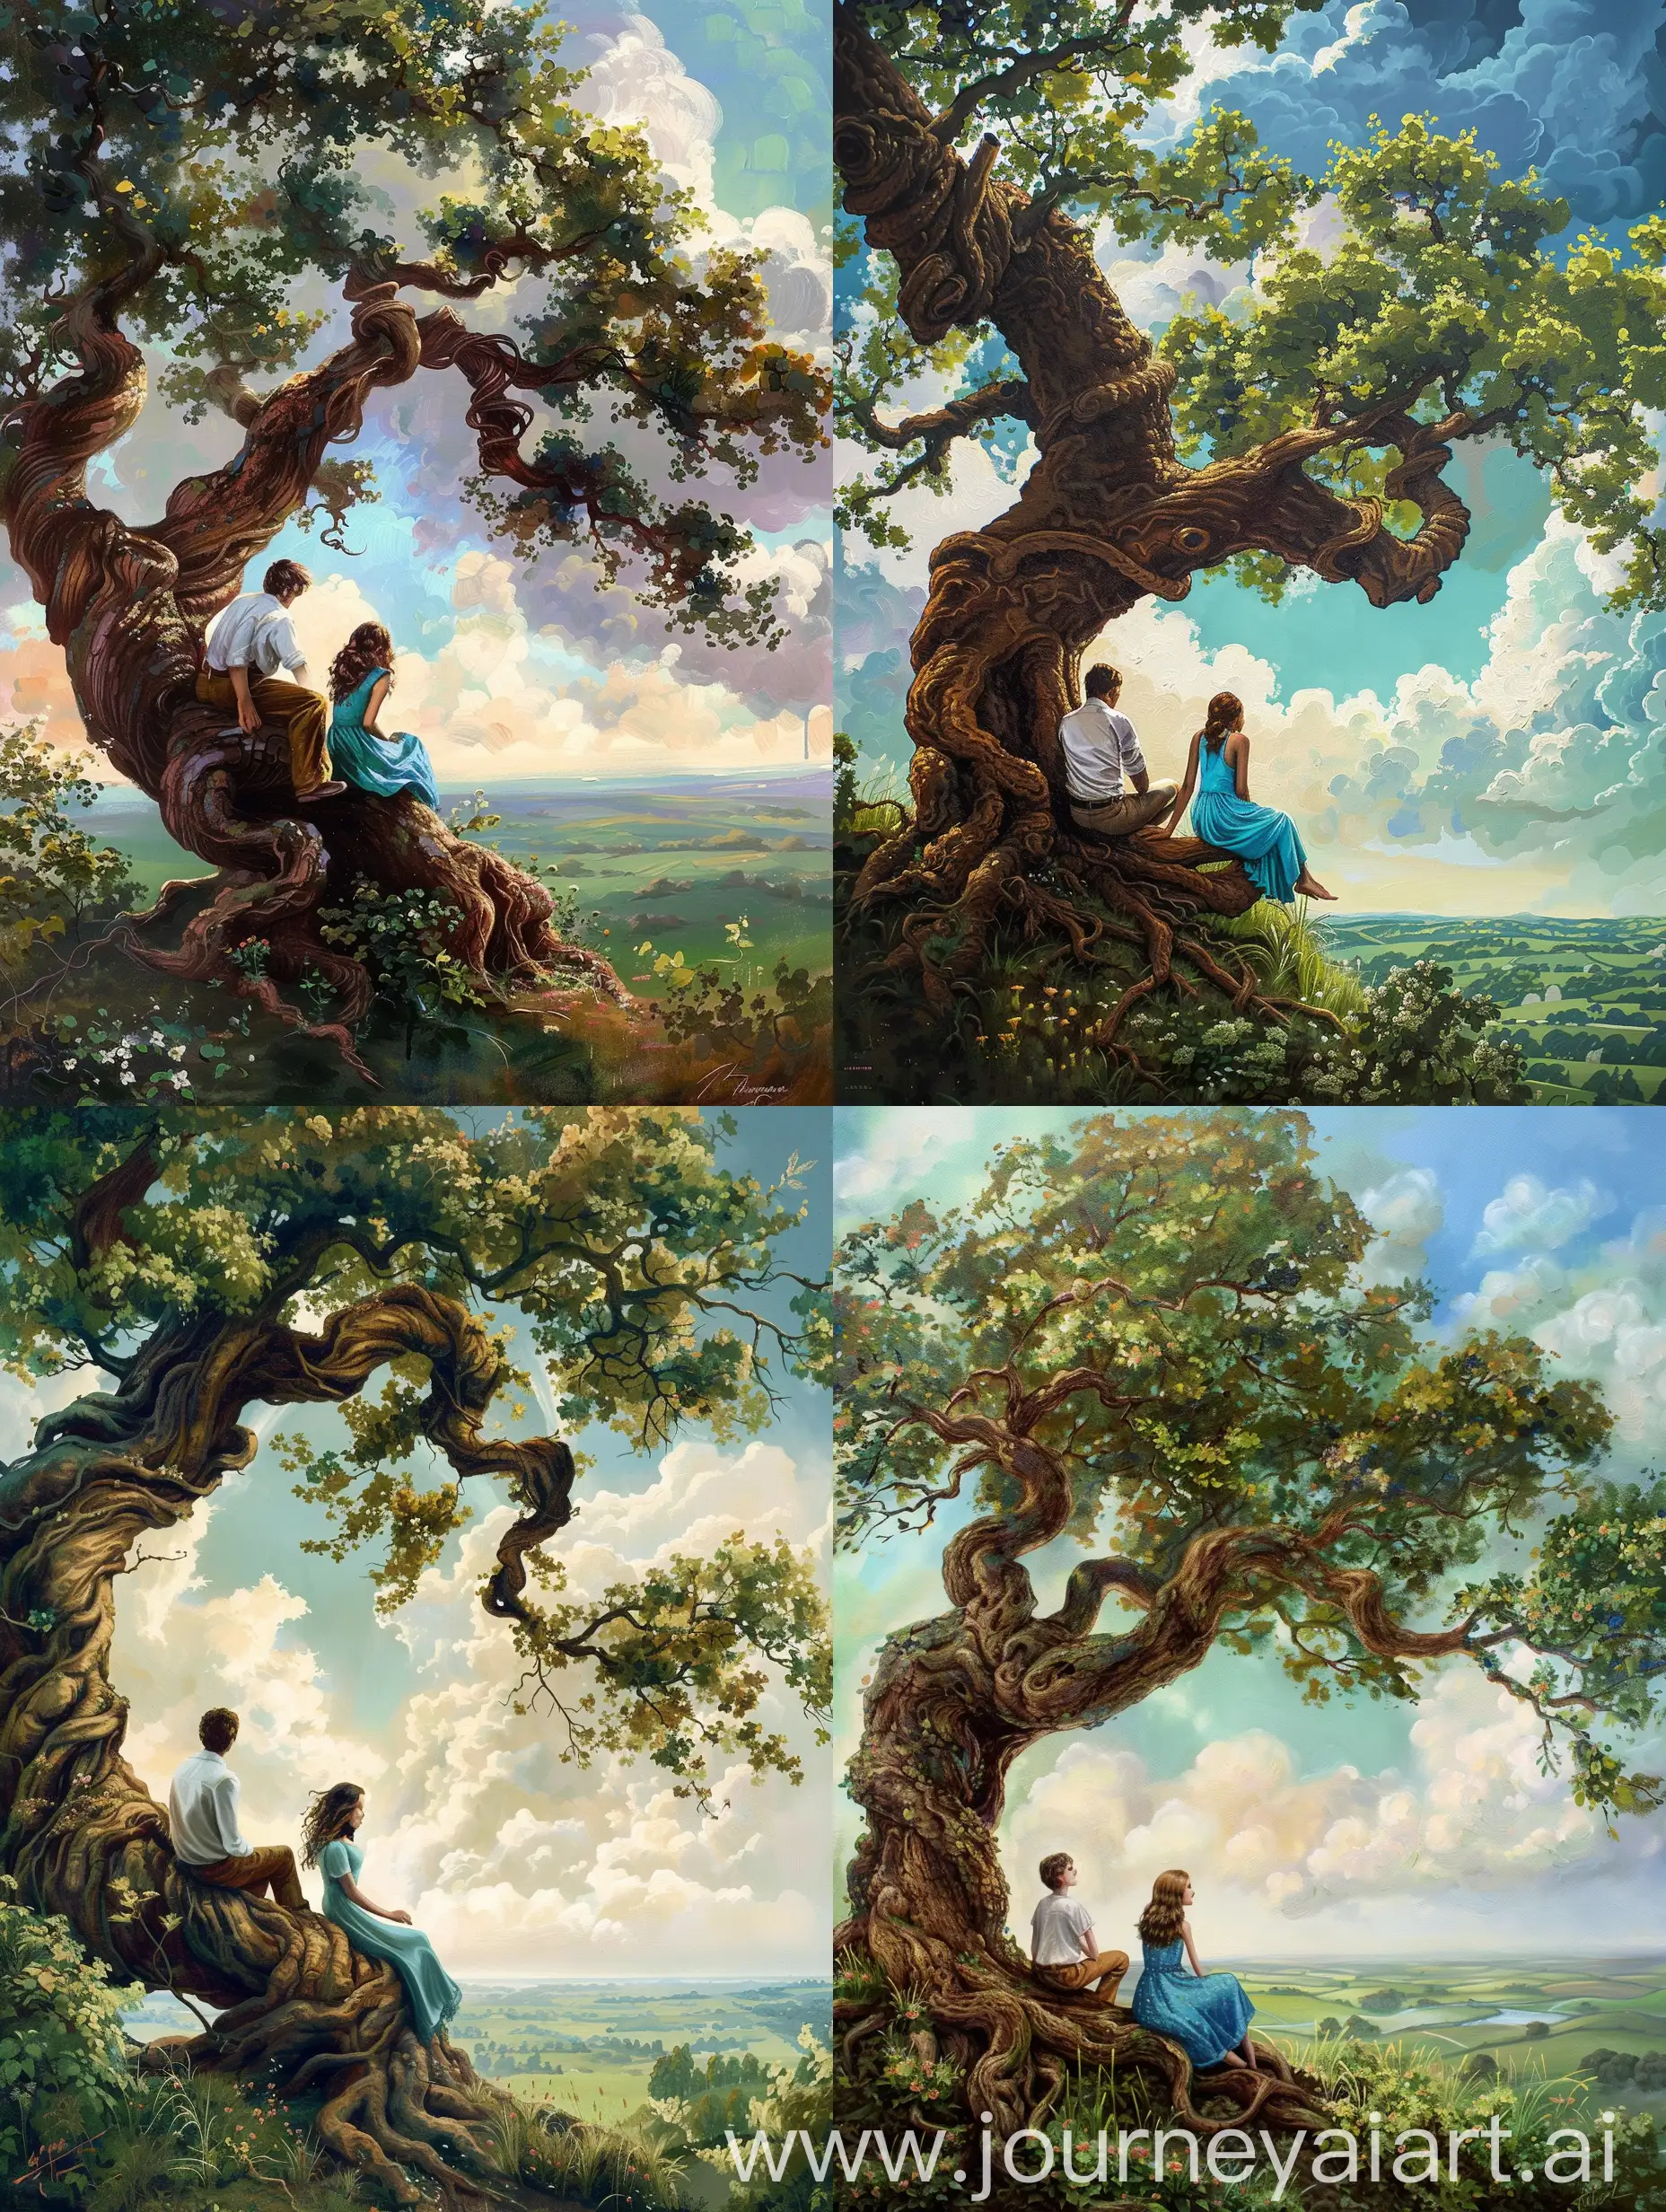 Abstraction,realism painting style,vibrant, flowers,grasses, featuring a massive, gnarled tree with a curving trunk on the left side, extending into branches that frame the top of the image. The tree is rich in detail, with lush green leaves and textured bark. Two people are sitting on the tree's roots, which twist and coil like a bench. The person on the left faces away, wearing a white shirt and brown pants; the one on the right sits in profile, in a blue dress, both depicted in natural, relaxed poses.The background is a vivid sky filled with fluffy, dynamic clouds ranging from brilliant white to soft gray, implying depth and dimensionality. Below the tree, a distant landscape of rolling green hills fades into the horizon beneath the expansive sky.The color palette is vibrant, emphasizing greens of the tree, blues of the sky and dress, and the earth tones of the attire and the tree. The style melds realism with a touch of fantasy, invoking a sense of wonder and tranquility. Light filters through the foliage, casting dappled sunlight on the figures and roots, enhancing the image’s depth and atmosphere.